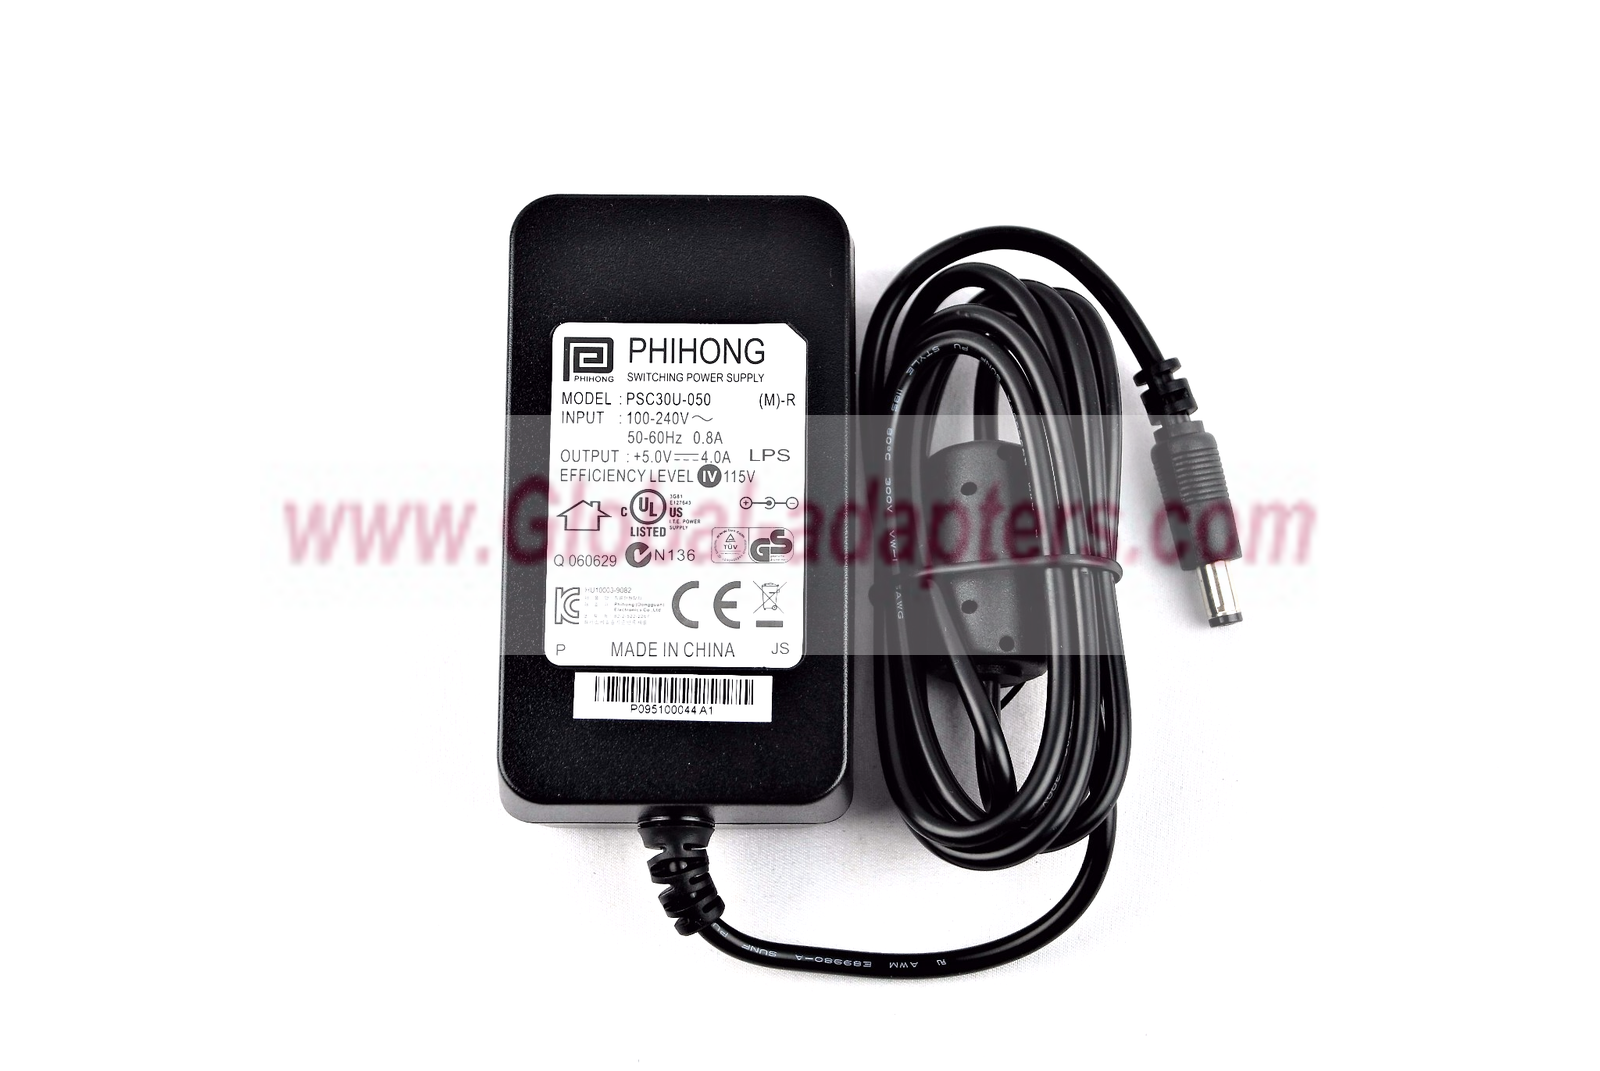 NEW 5V 4A PHIHONG PSC30U-050 P095100044A1 SWITCHING AC ADAPTER - Click Image to Close